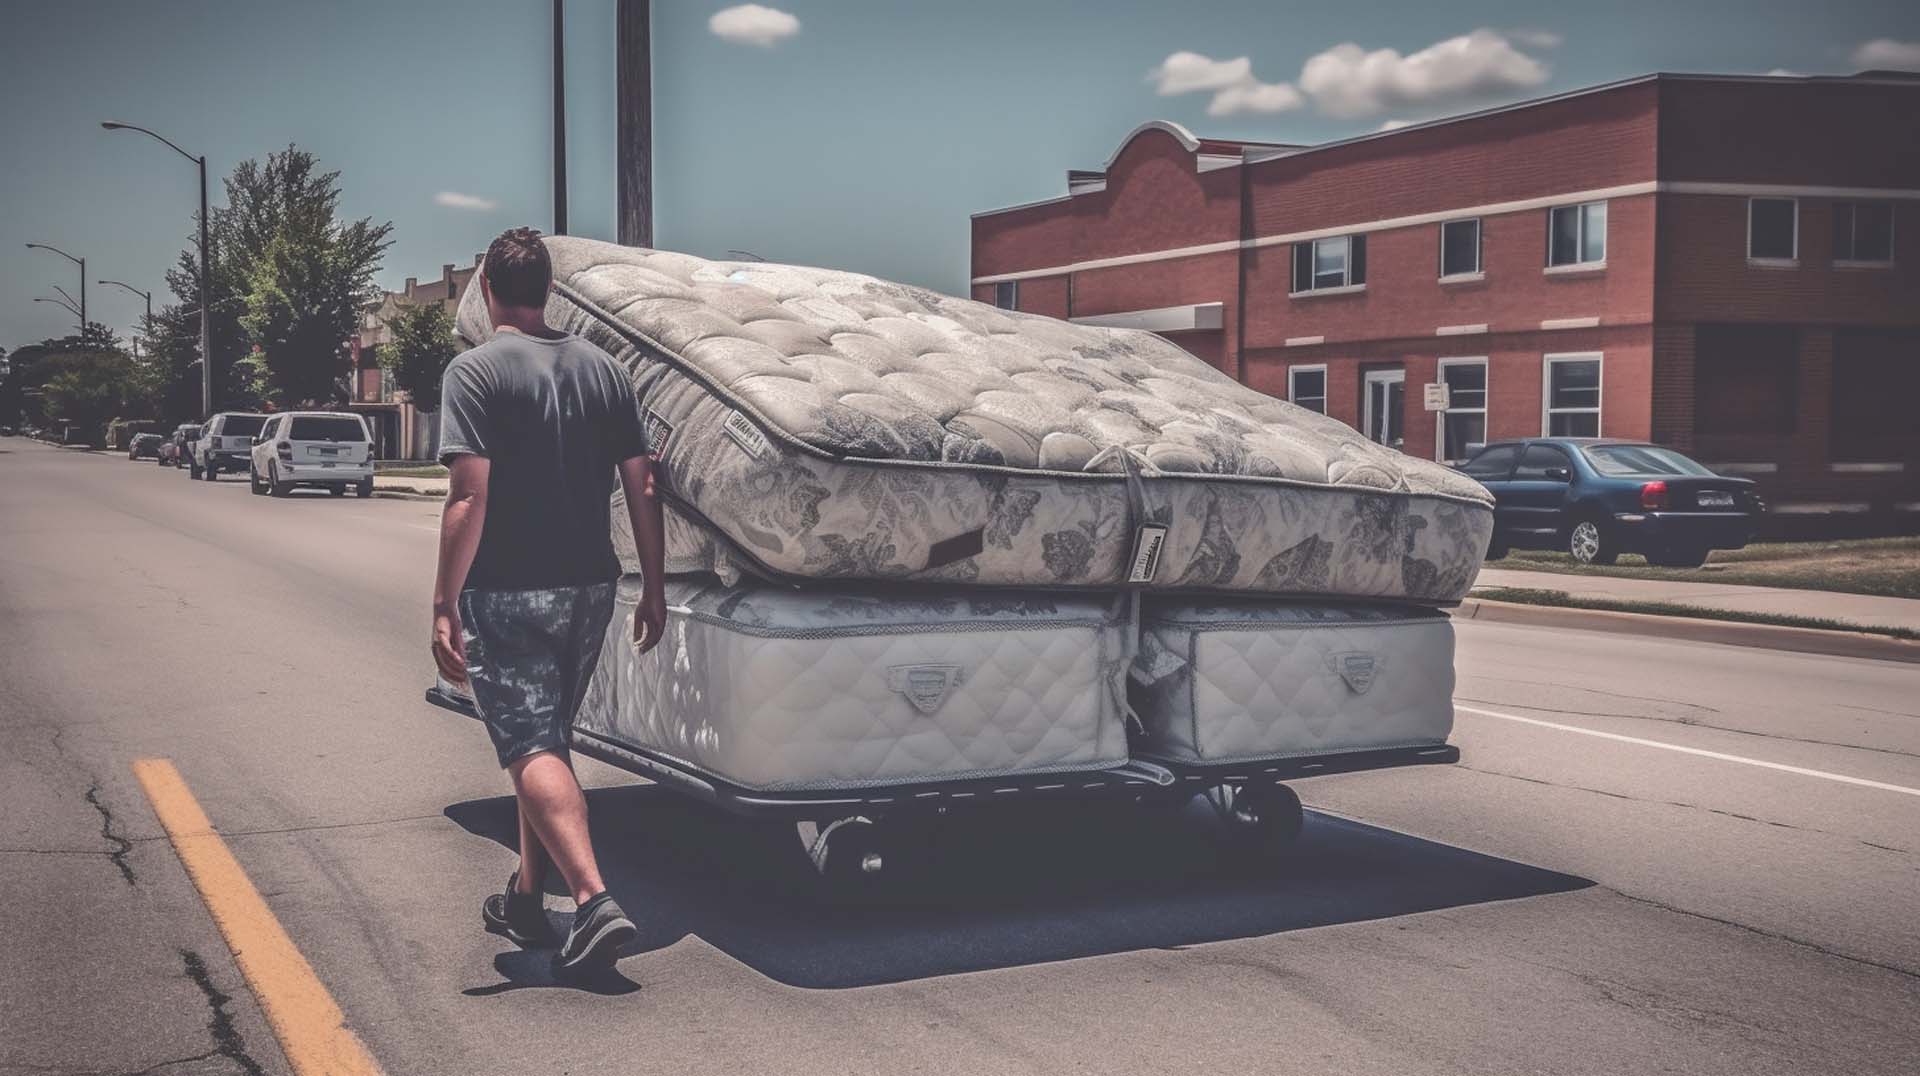 How to Properly Dispose of Old Mattresses in Steinbach, MB